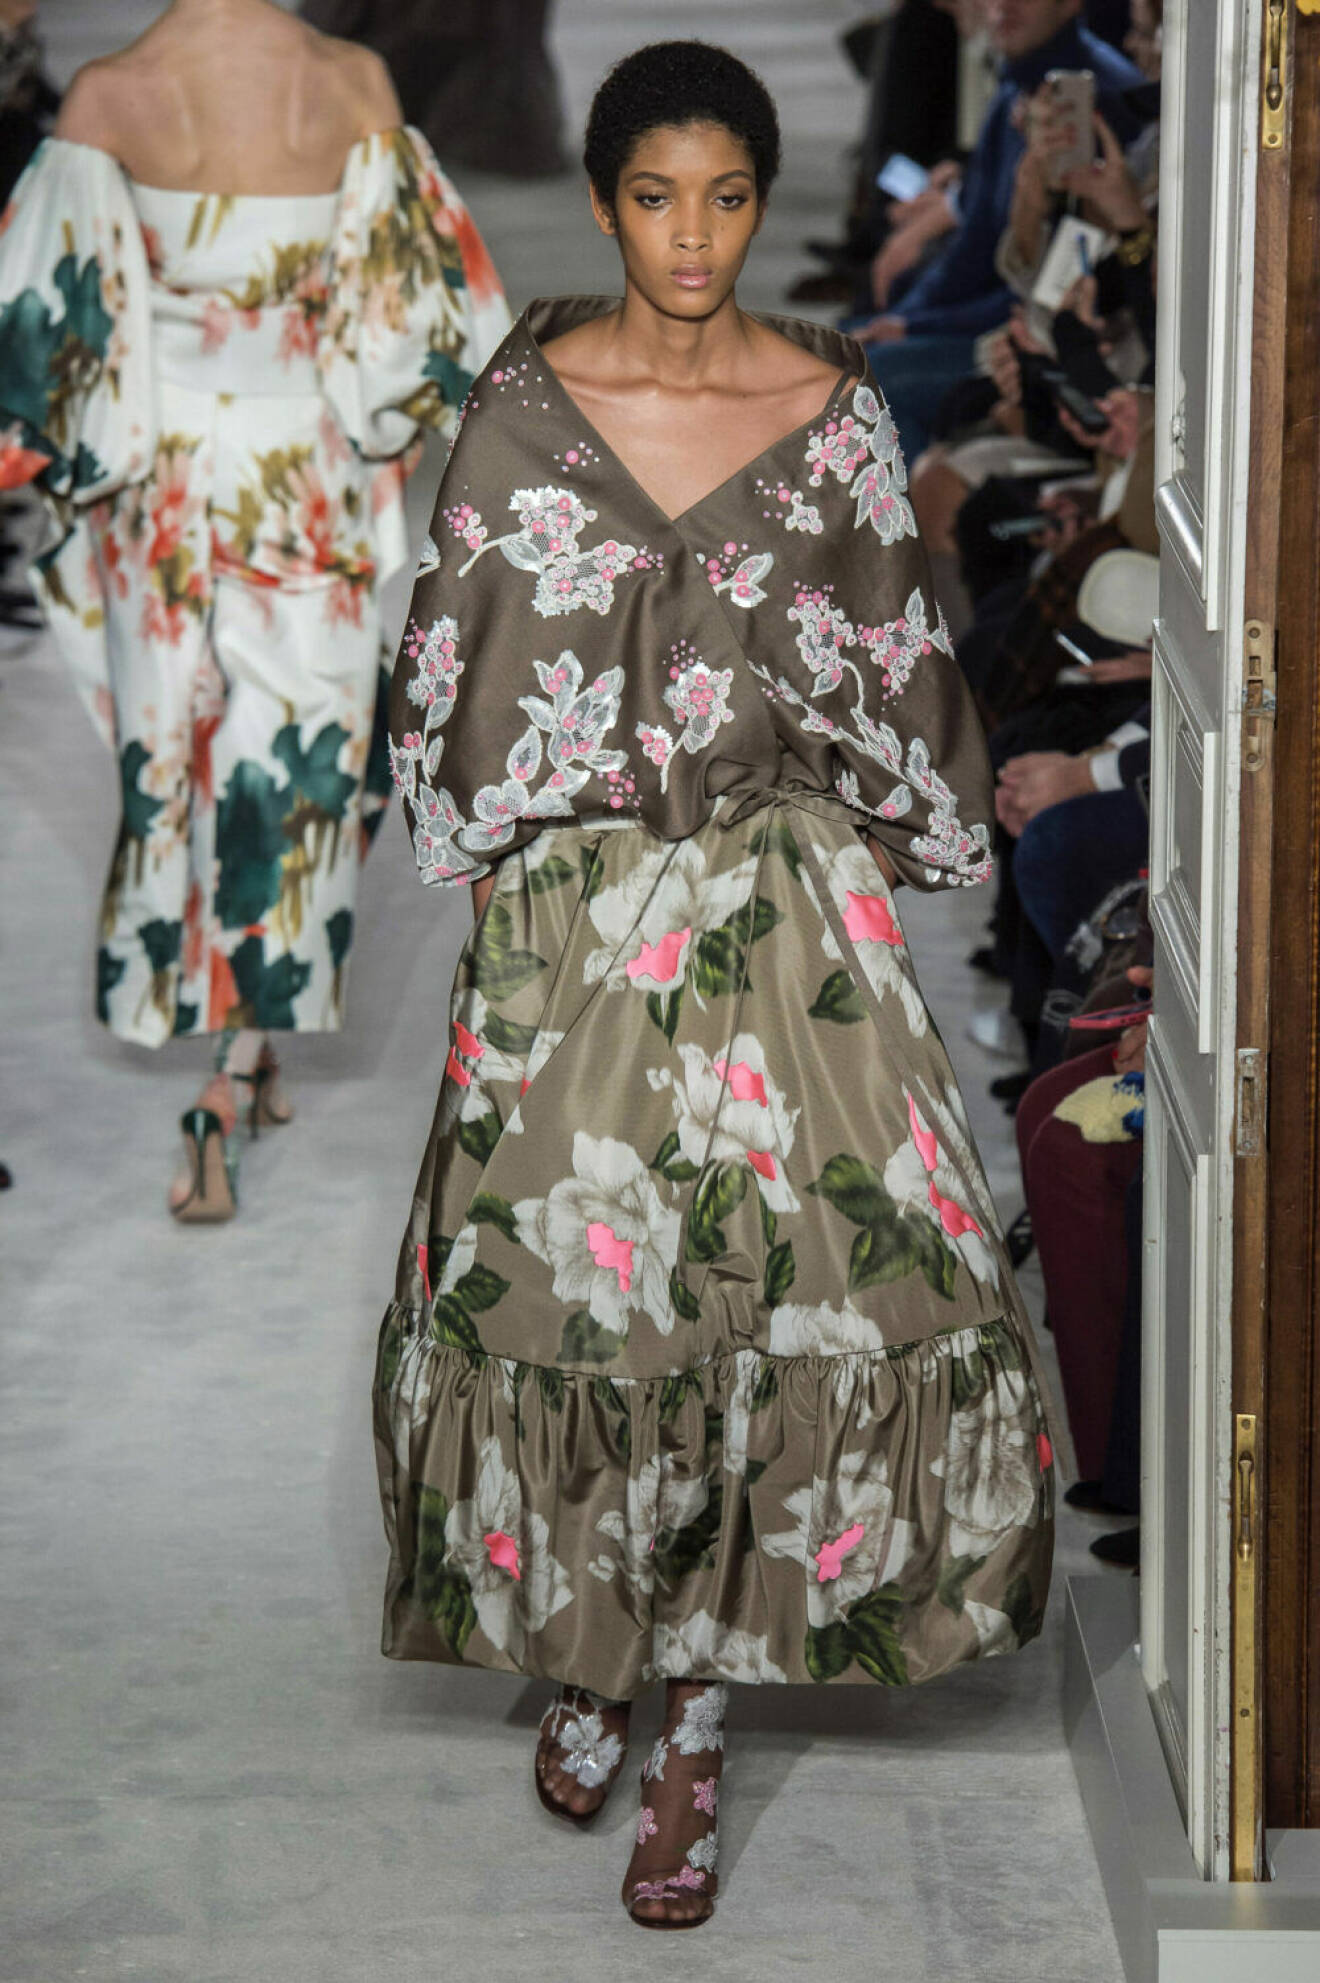 Valentino Haute Couture SS19, brun kreation med blommönster.